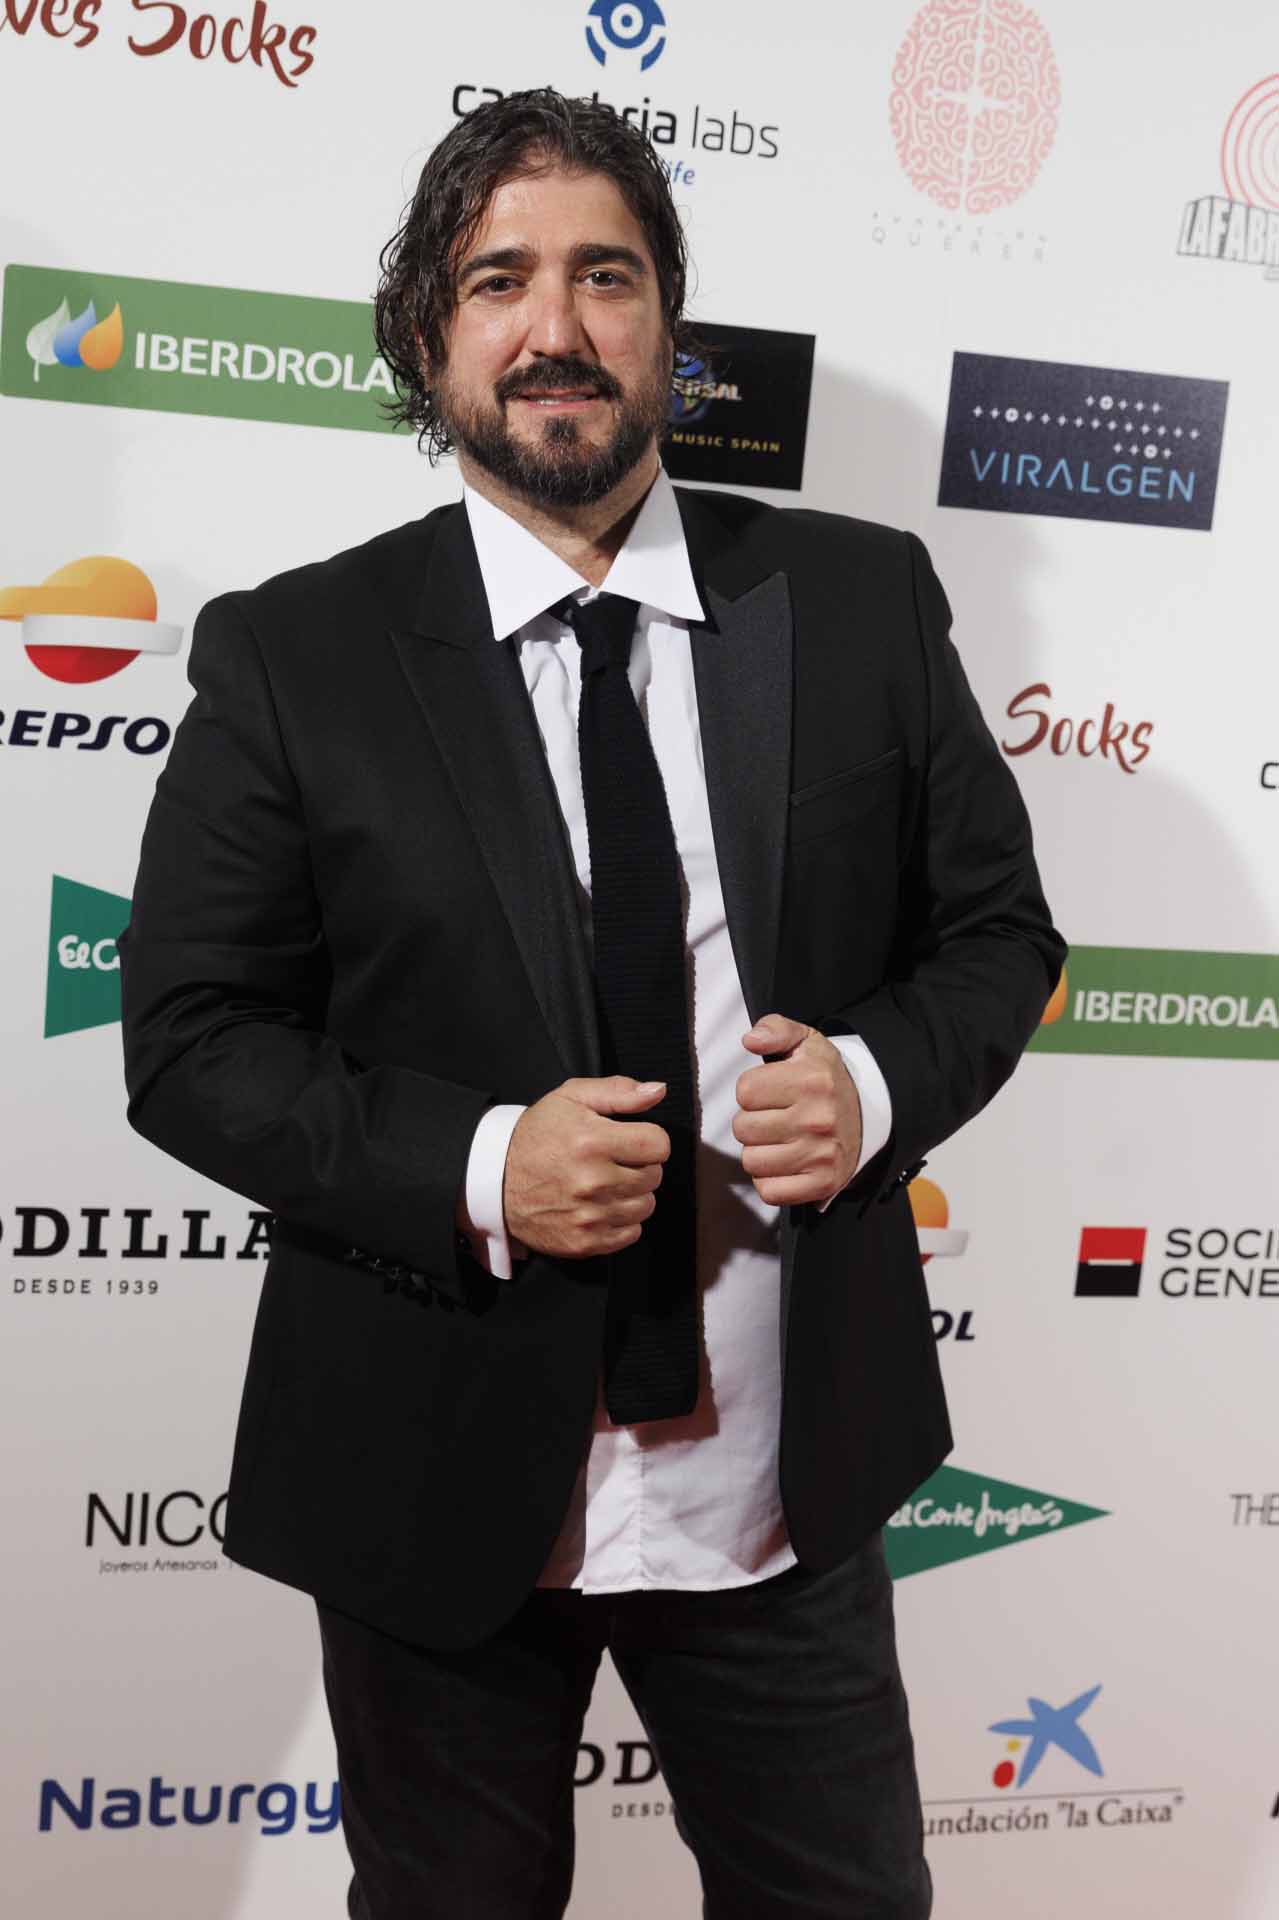 Singer Antonio Orozco at the photocall of the FundaciÃƒÂ³n Querer and Columbus event in Madrid on Tuesday, April 26, 2022.